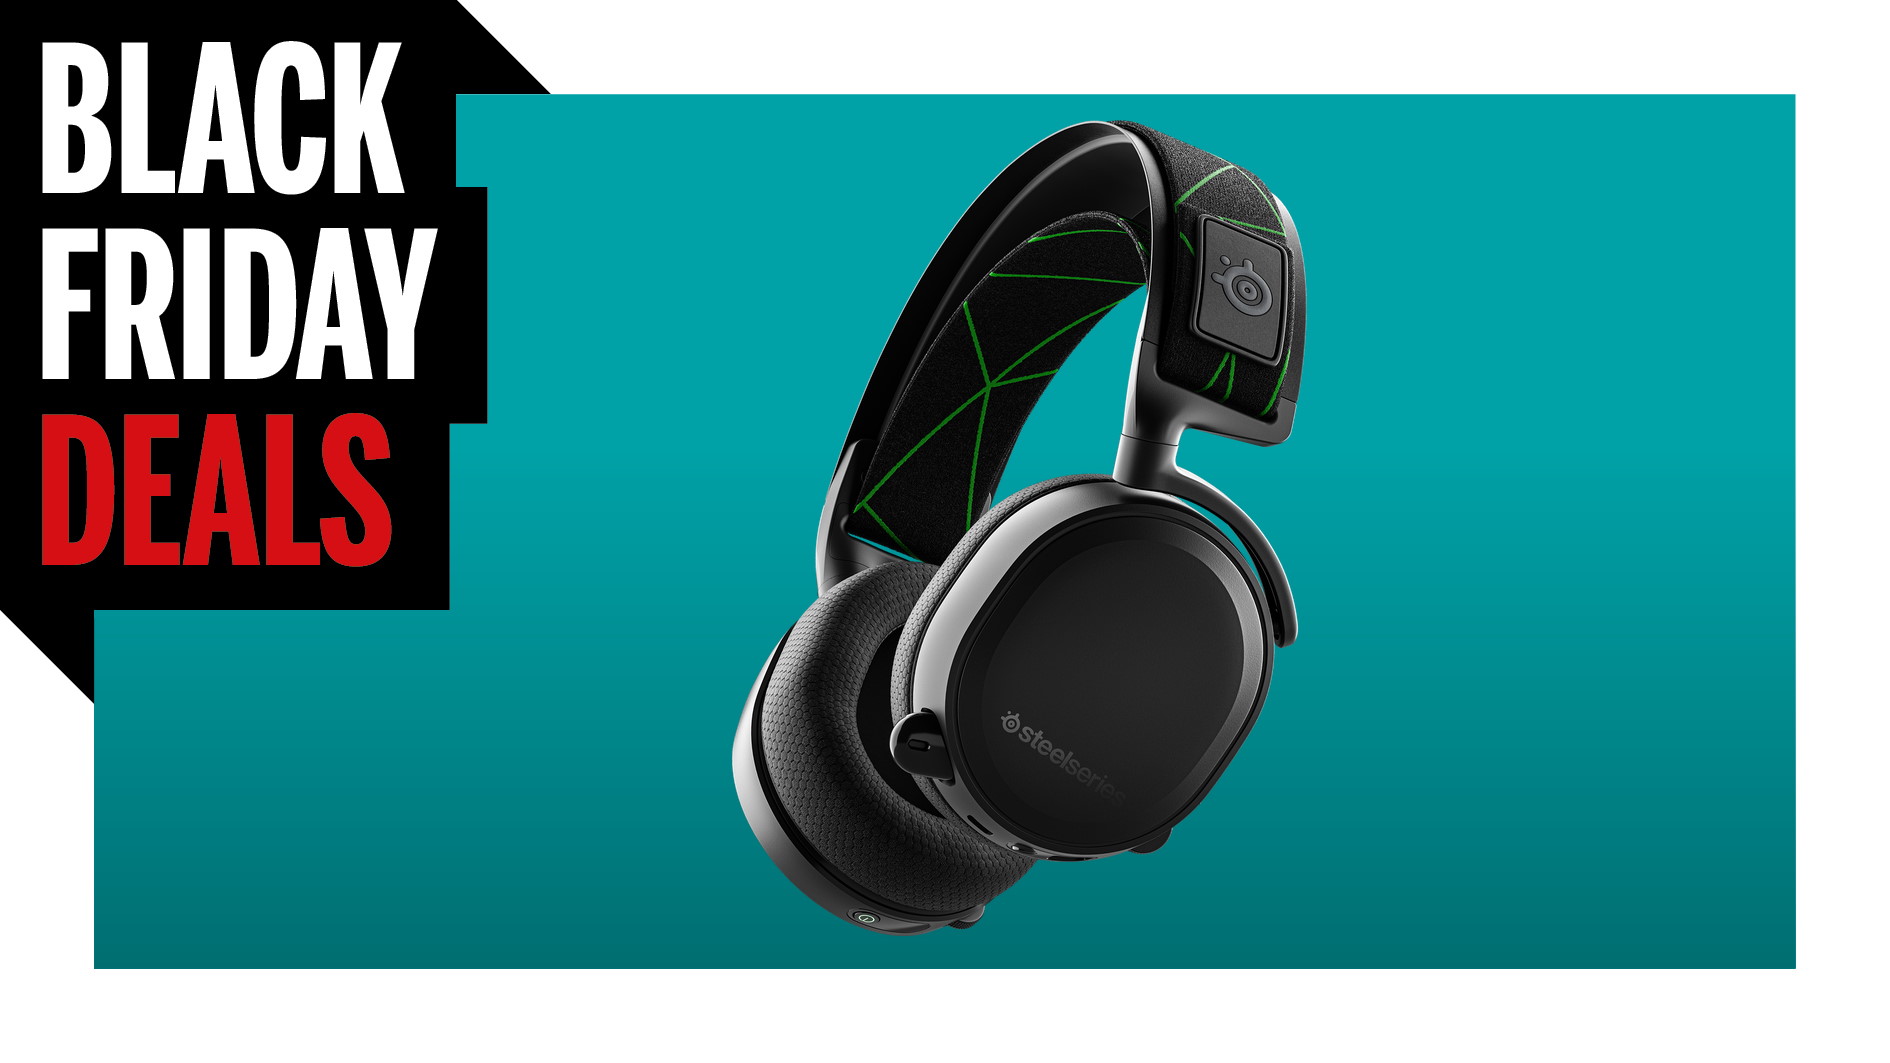  One of our favorite wireless headsets is 40% off for Black Friday  